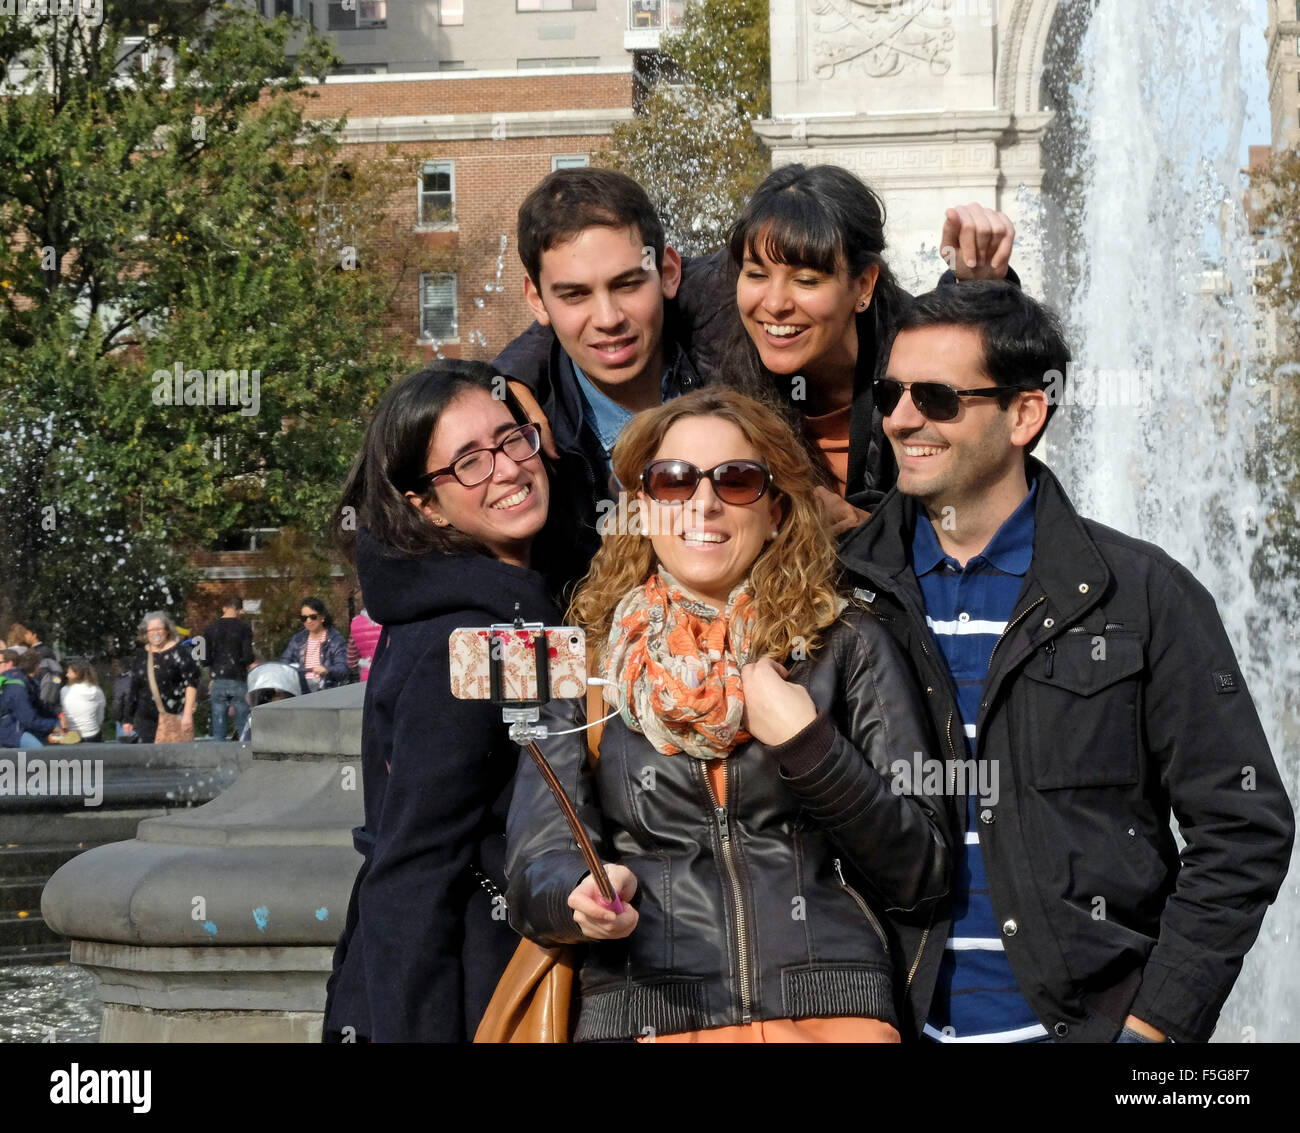 A group of men & women taking a selfie in Washington Square Park in Greenwich Village, New York City Stock Photo